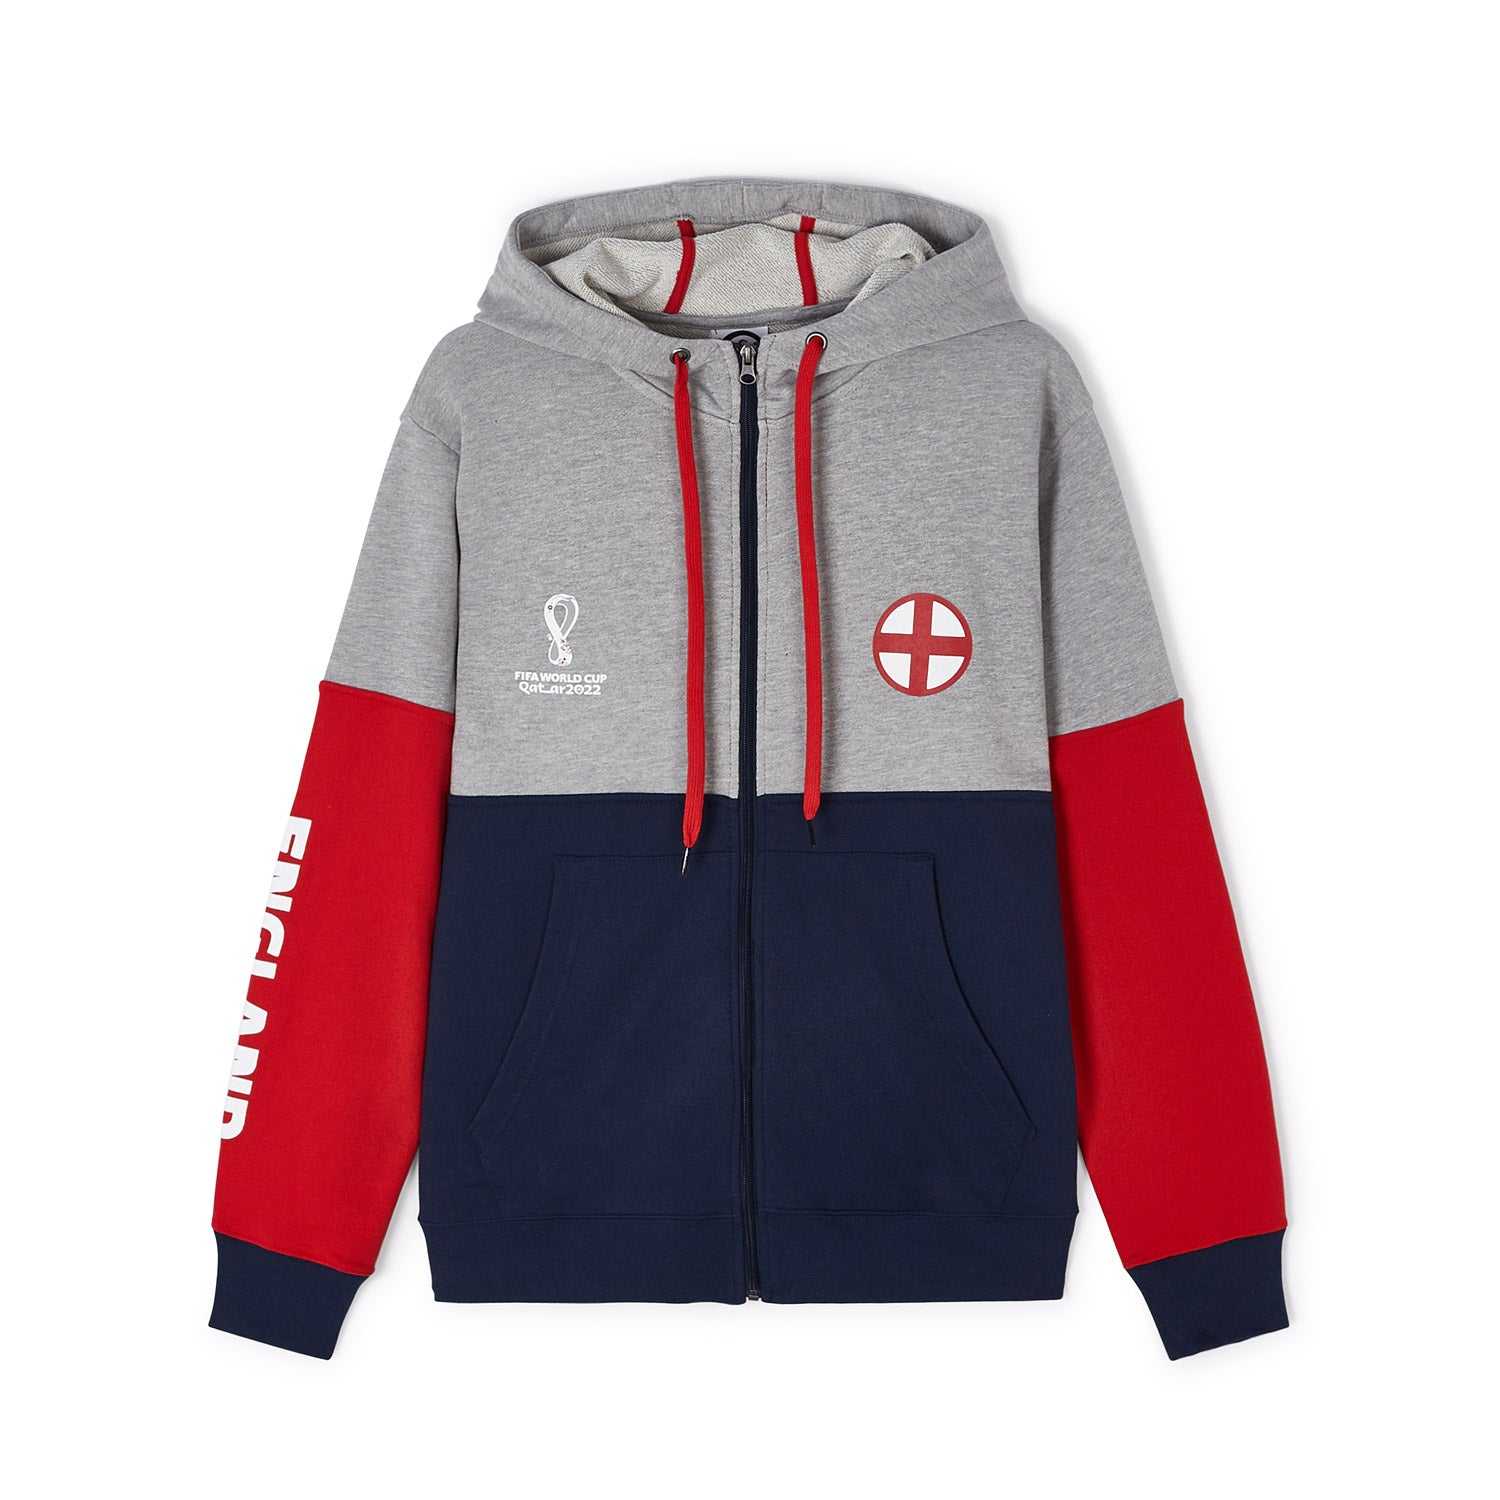 2022 World Cup England Contrast Navy Hoodie - Mens